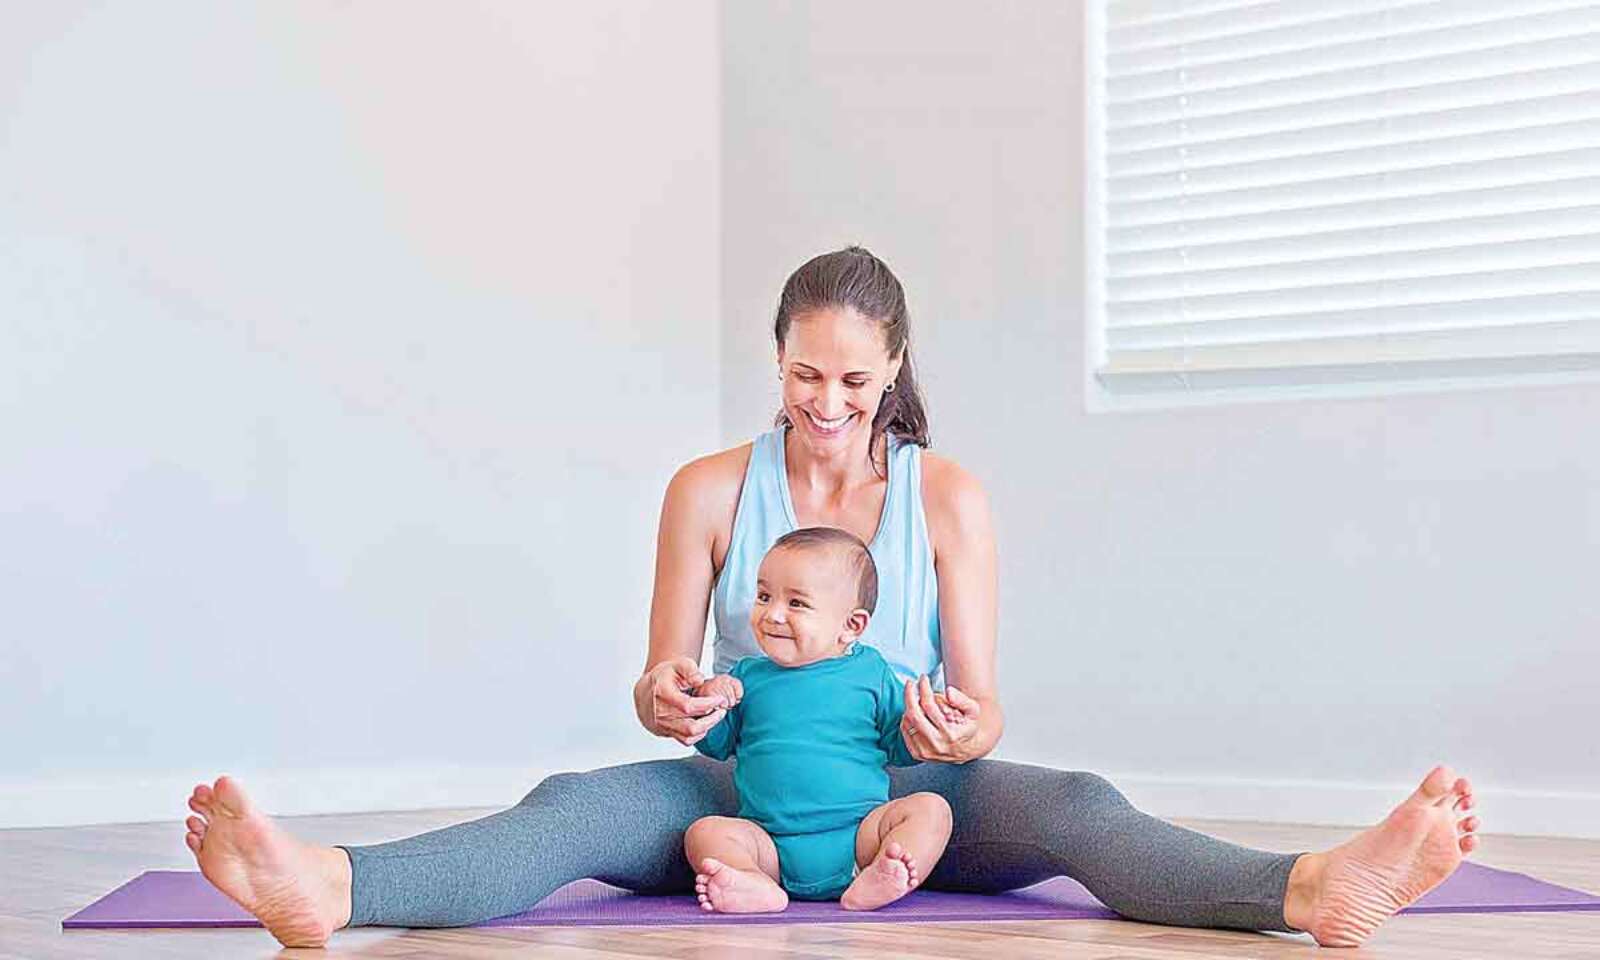 Only 7% of mothers actually practise prenatal or postnatal yoga